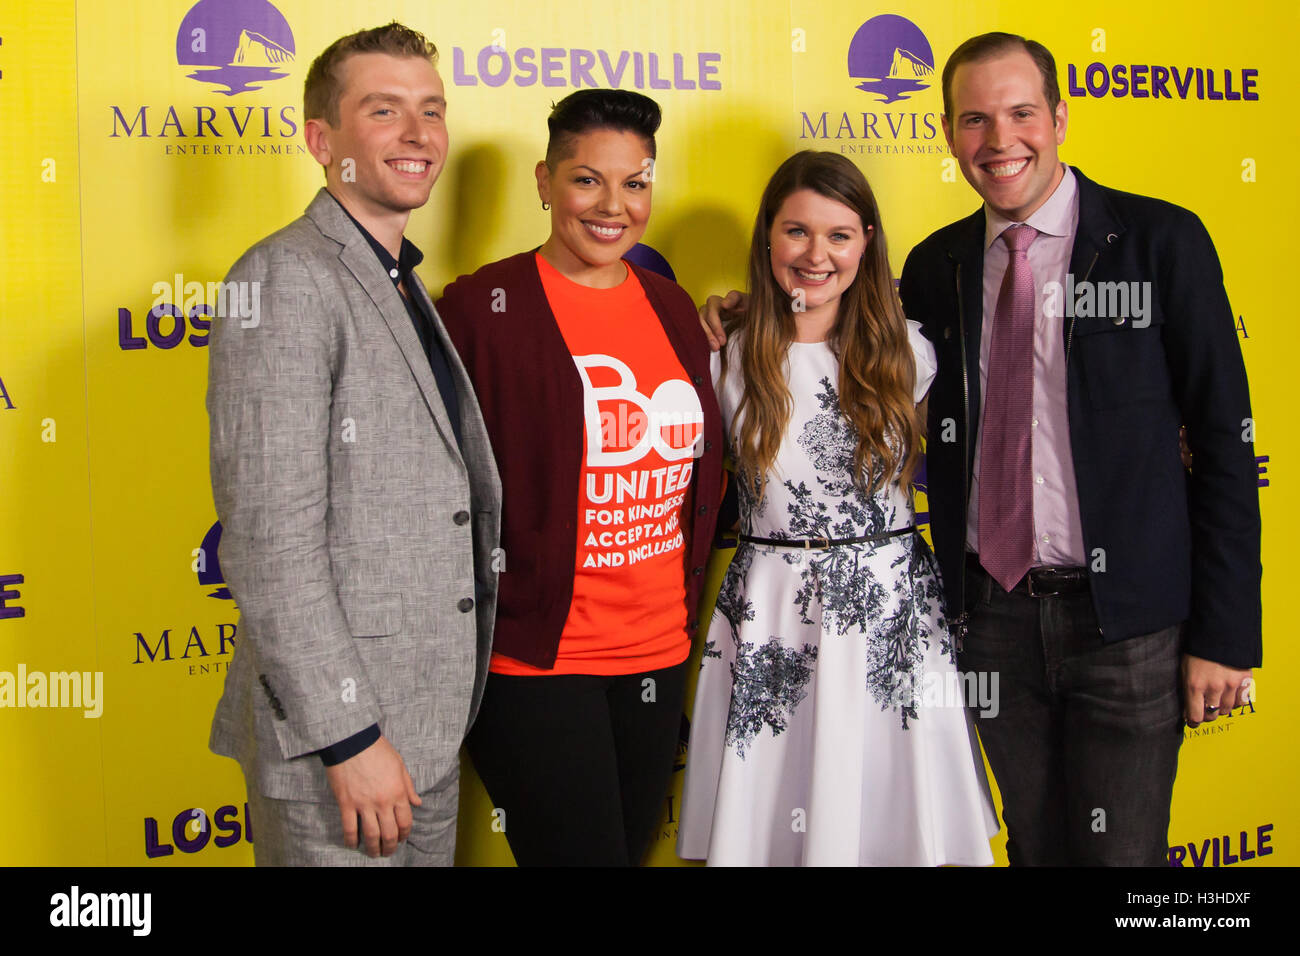 Chris Bellant, Sarah Jes Austell, Lovell Holder and Sara Ramirez attend Red Carpet Premiere of LOSERVILLE on September 29, 2016 in Los Angeles, California Stock Photo